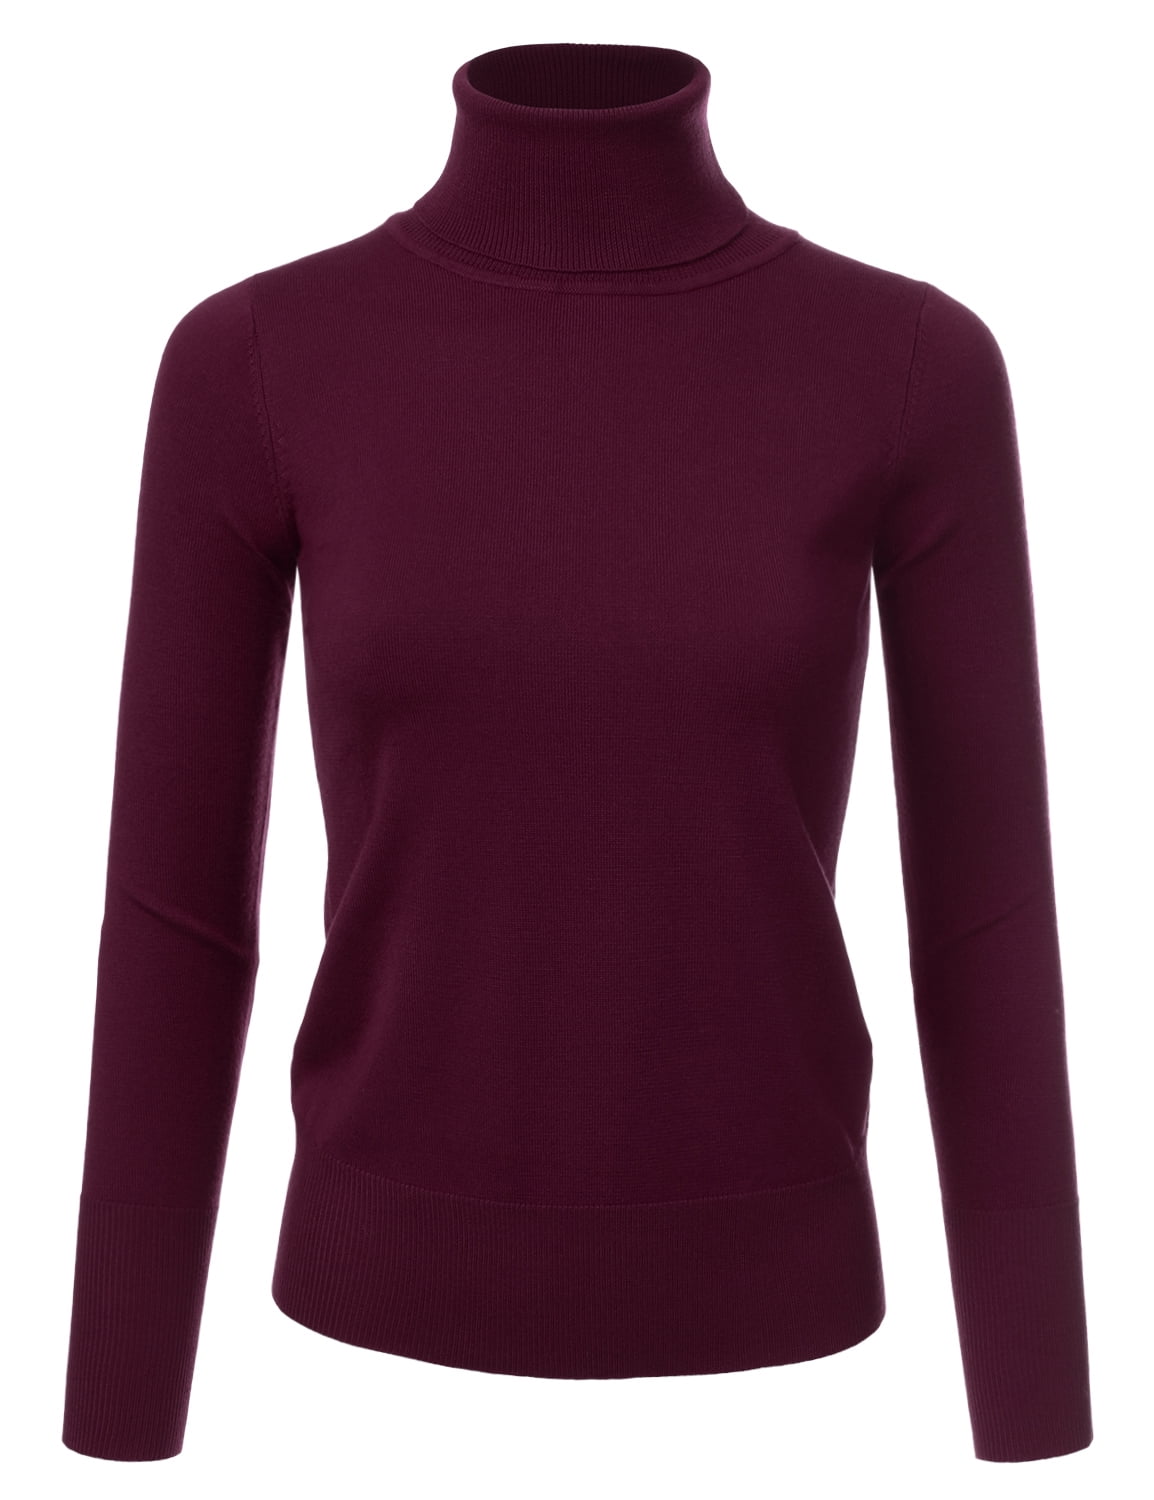 JJ Perfection Women's Stretch Knit Turtle Neck Long Sleeve Pullover ...